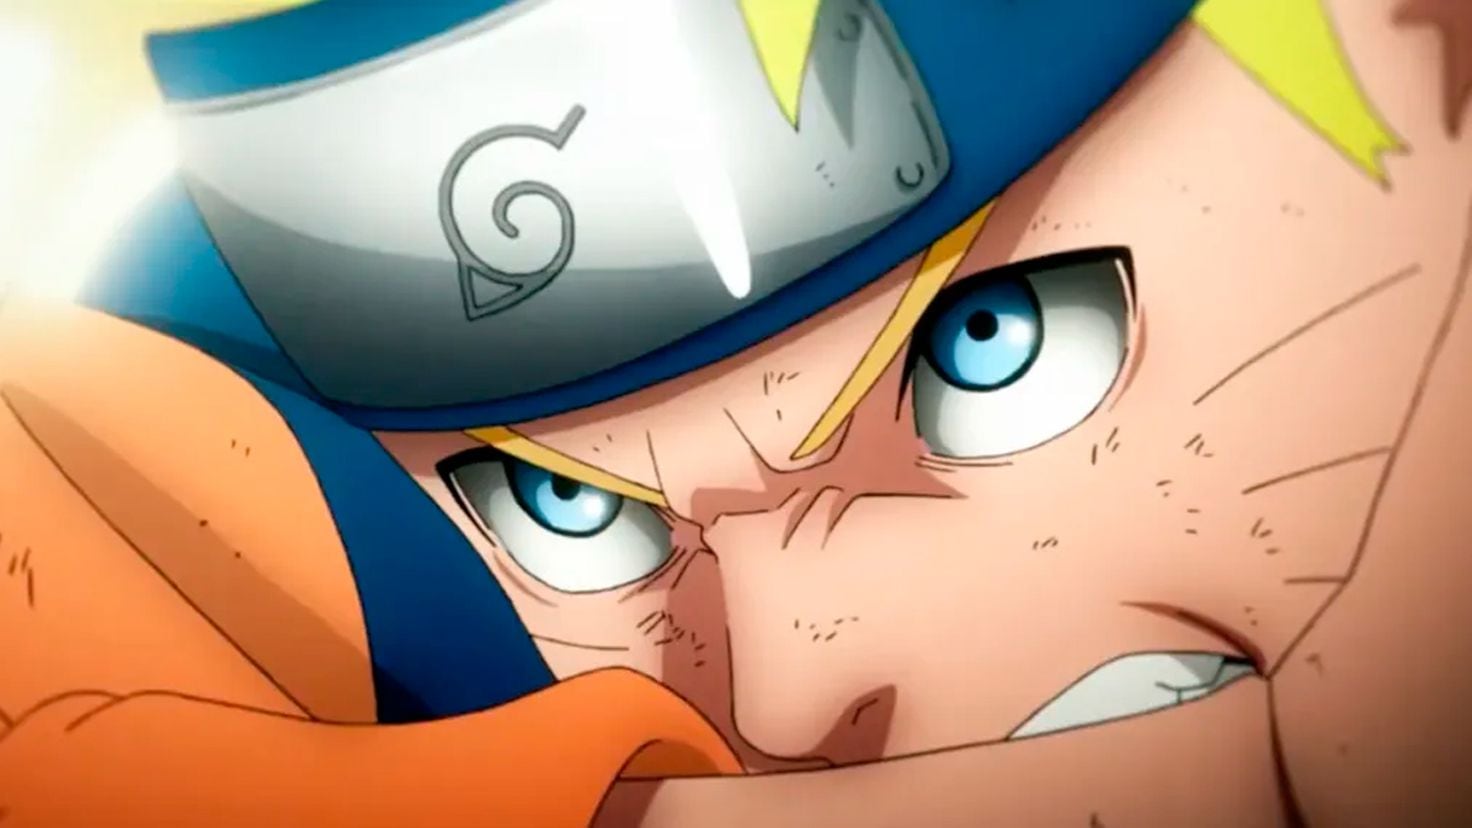 Naruto celebrates its 20th anniversary with a trailer for its new